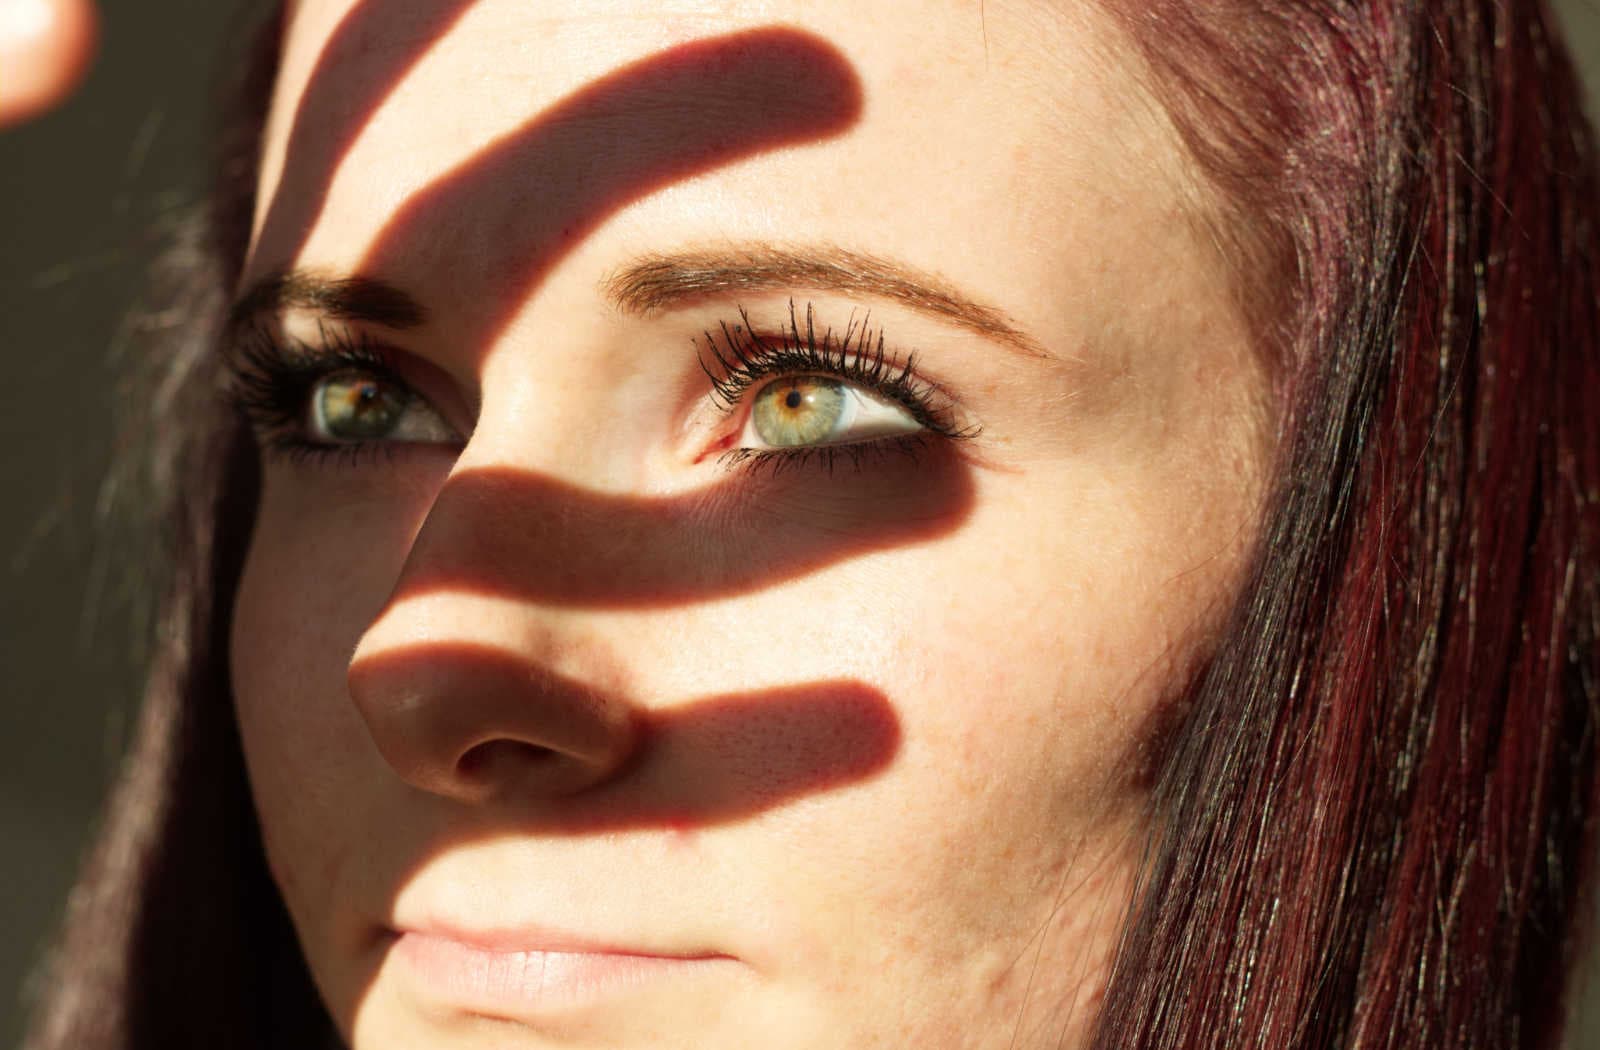 Is It True That Blue Eyes Are More Vulnerable to UV Damage?